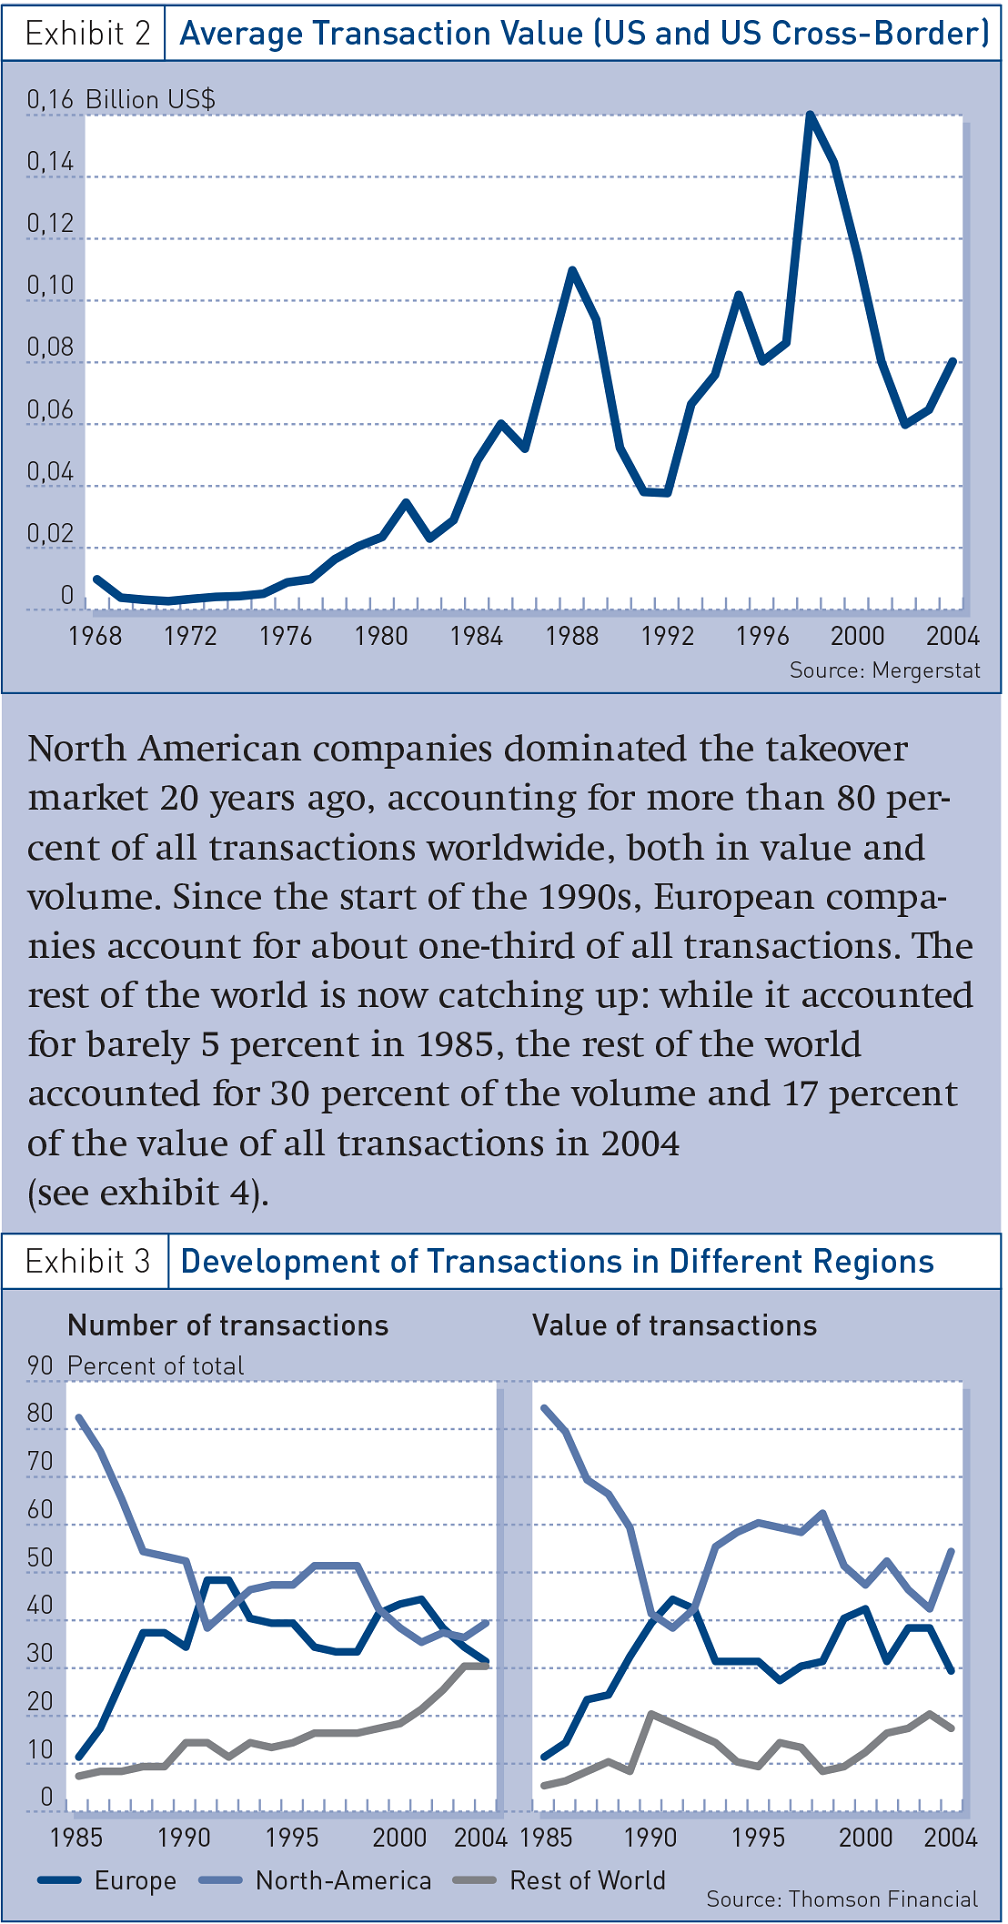 Average Transaction Value (US and US Cross-Border) & Development of Transactions in Different Regions